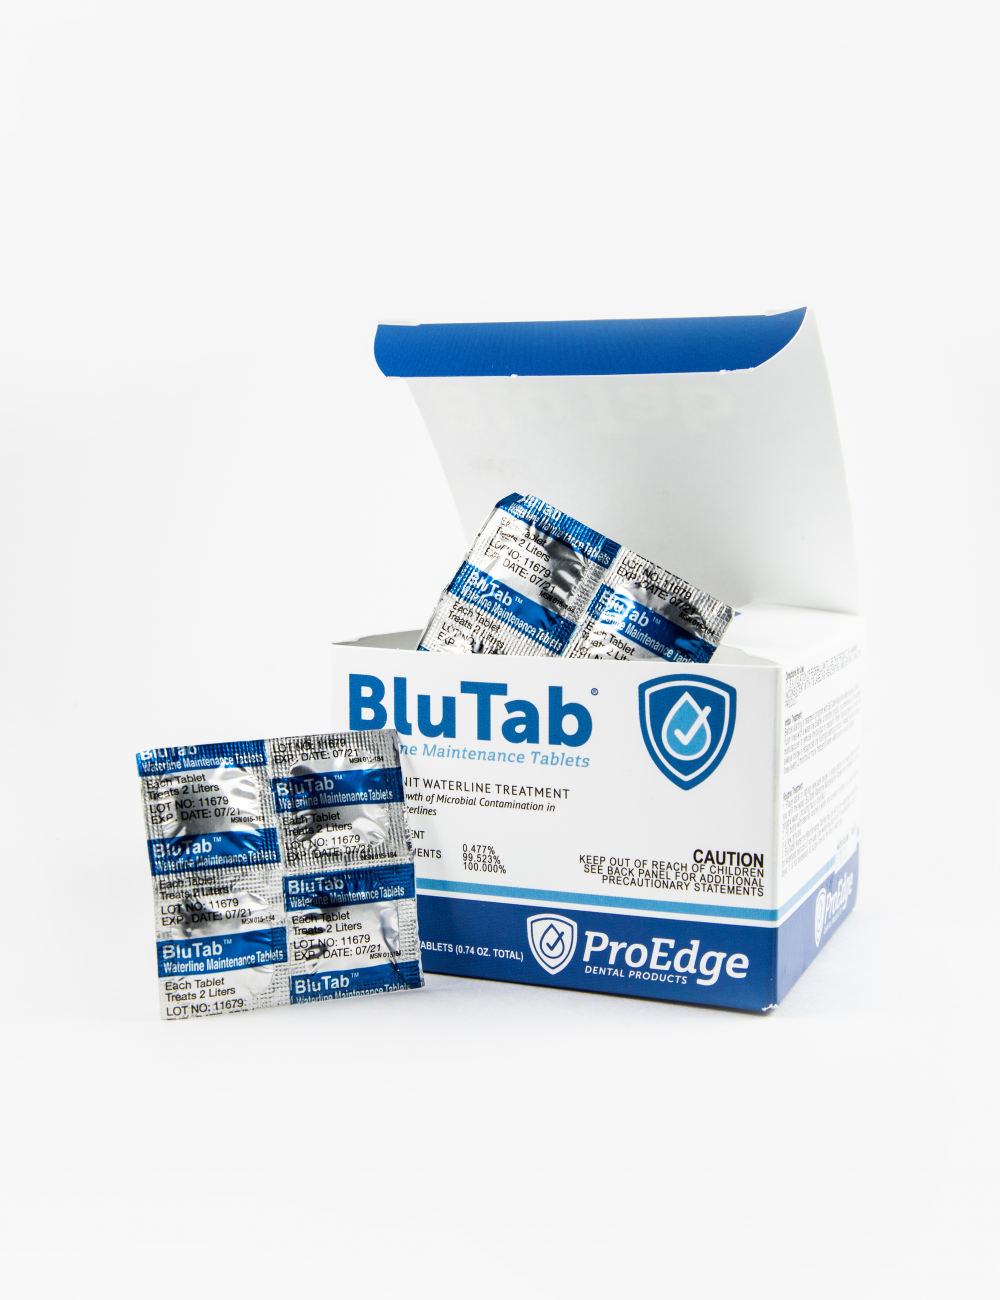 Blutab box with tablets